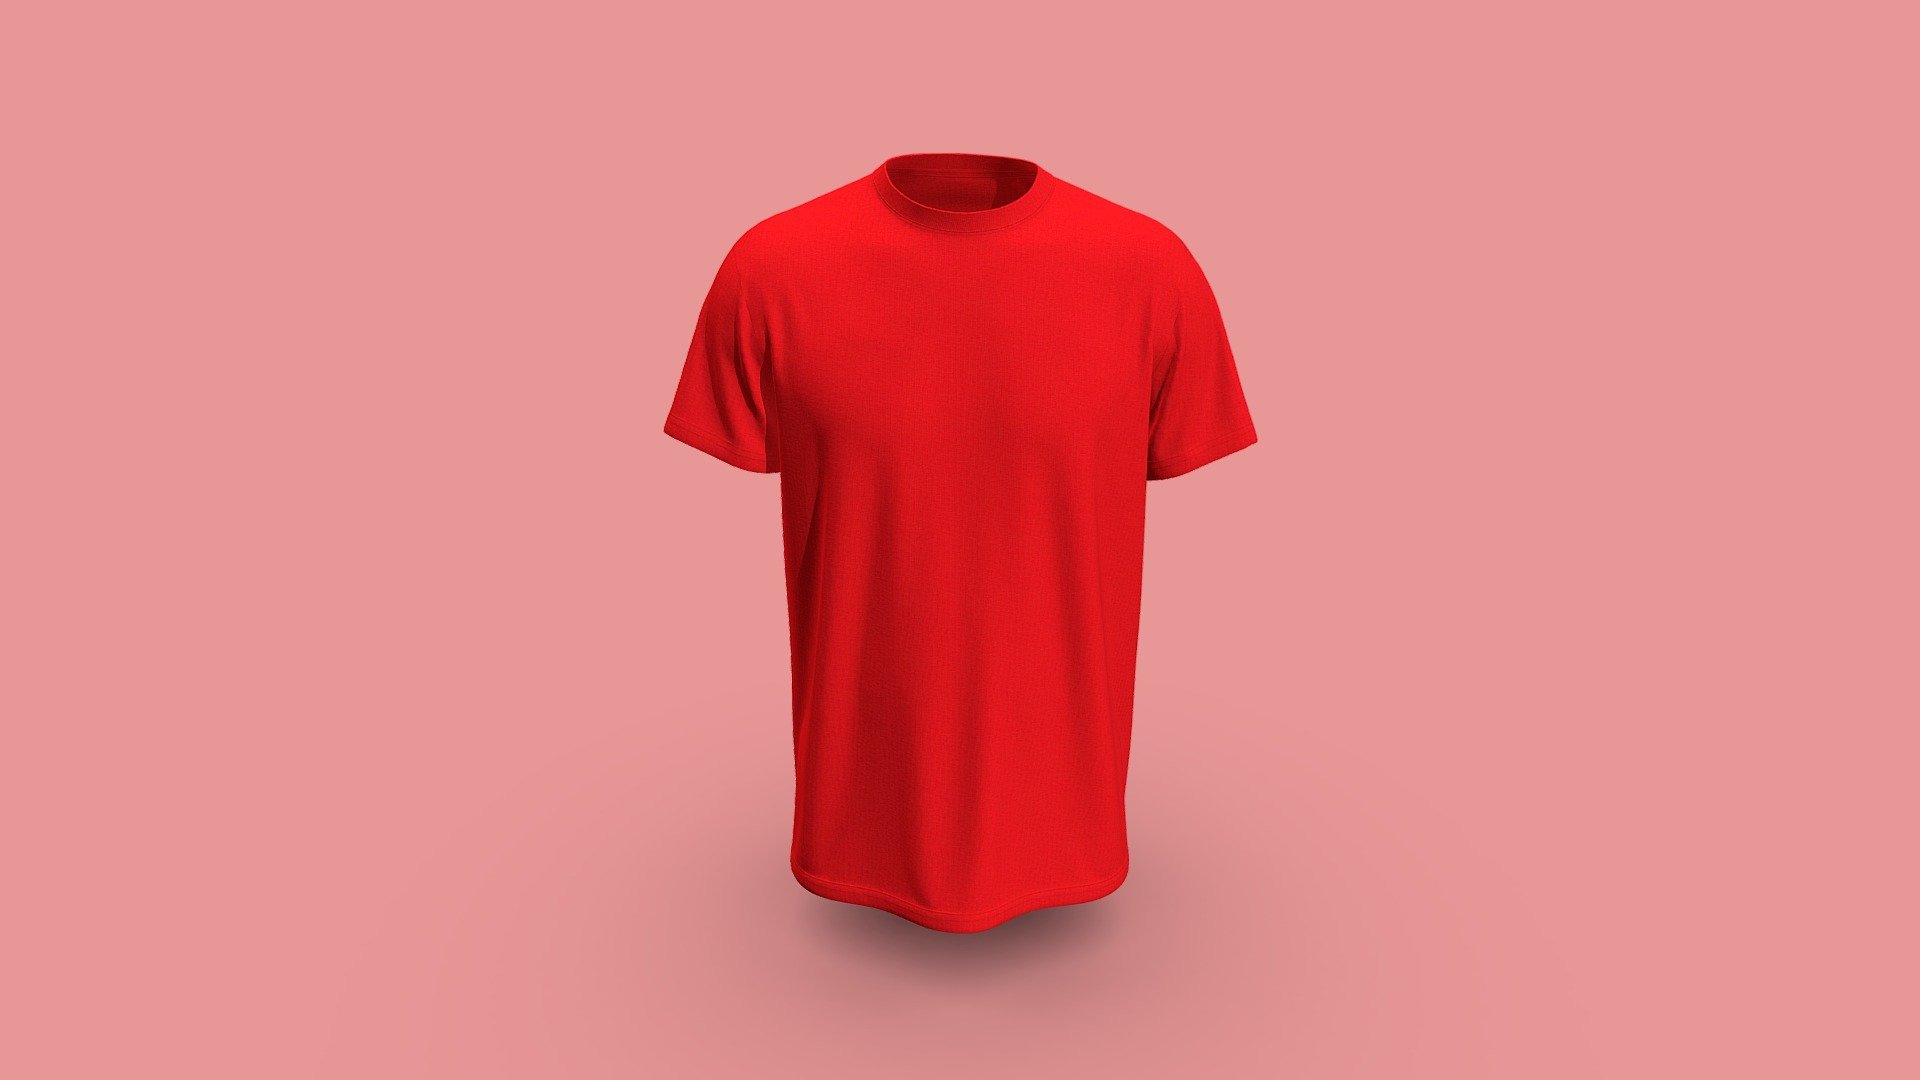 Cloth Title = Basic Top Tee Design
 
SKU = DG100209 

Category = Unisex
 
Product Type = T-Shirt 

Cloth Length = Regular
 
Body Fit = Loose Fit
 
Occasion = Casual 
 
Sleeve Style = Set In Sleeve
  

Our Services:

3D Apparel Design.

OBJ,FBX,GLTF Making with High/Low Poly.

Fabric Digitalization.

Mockup making.

3D Teck Pack.

Pattern Making.

2D Illustration.

Cloth Animation and 360 Spin Video.


Contact us:- 

Email: info@digitalfashionwear.com 

Website: https://digitalfashionwear.com 


We designed all the types of cloth specially focused on product visualization, e-commerce, fitting, and production. 

We will design: 

T-shirts 

Polo shirts 

Hoodies 

Sweatshirt 

Jackets 

Shirts 

TankTops 

Trousers 

Bras 

Underwear 

Blazer 

Aprons 

Leggings 

and All Fashion items. 





Our goal is to make sure what we provide you, meets your demand 3d model